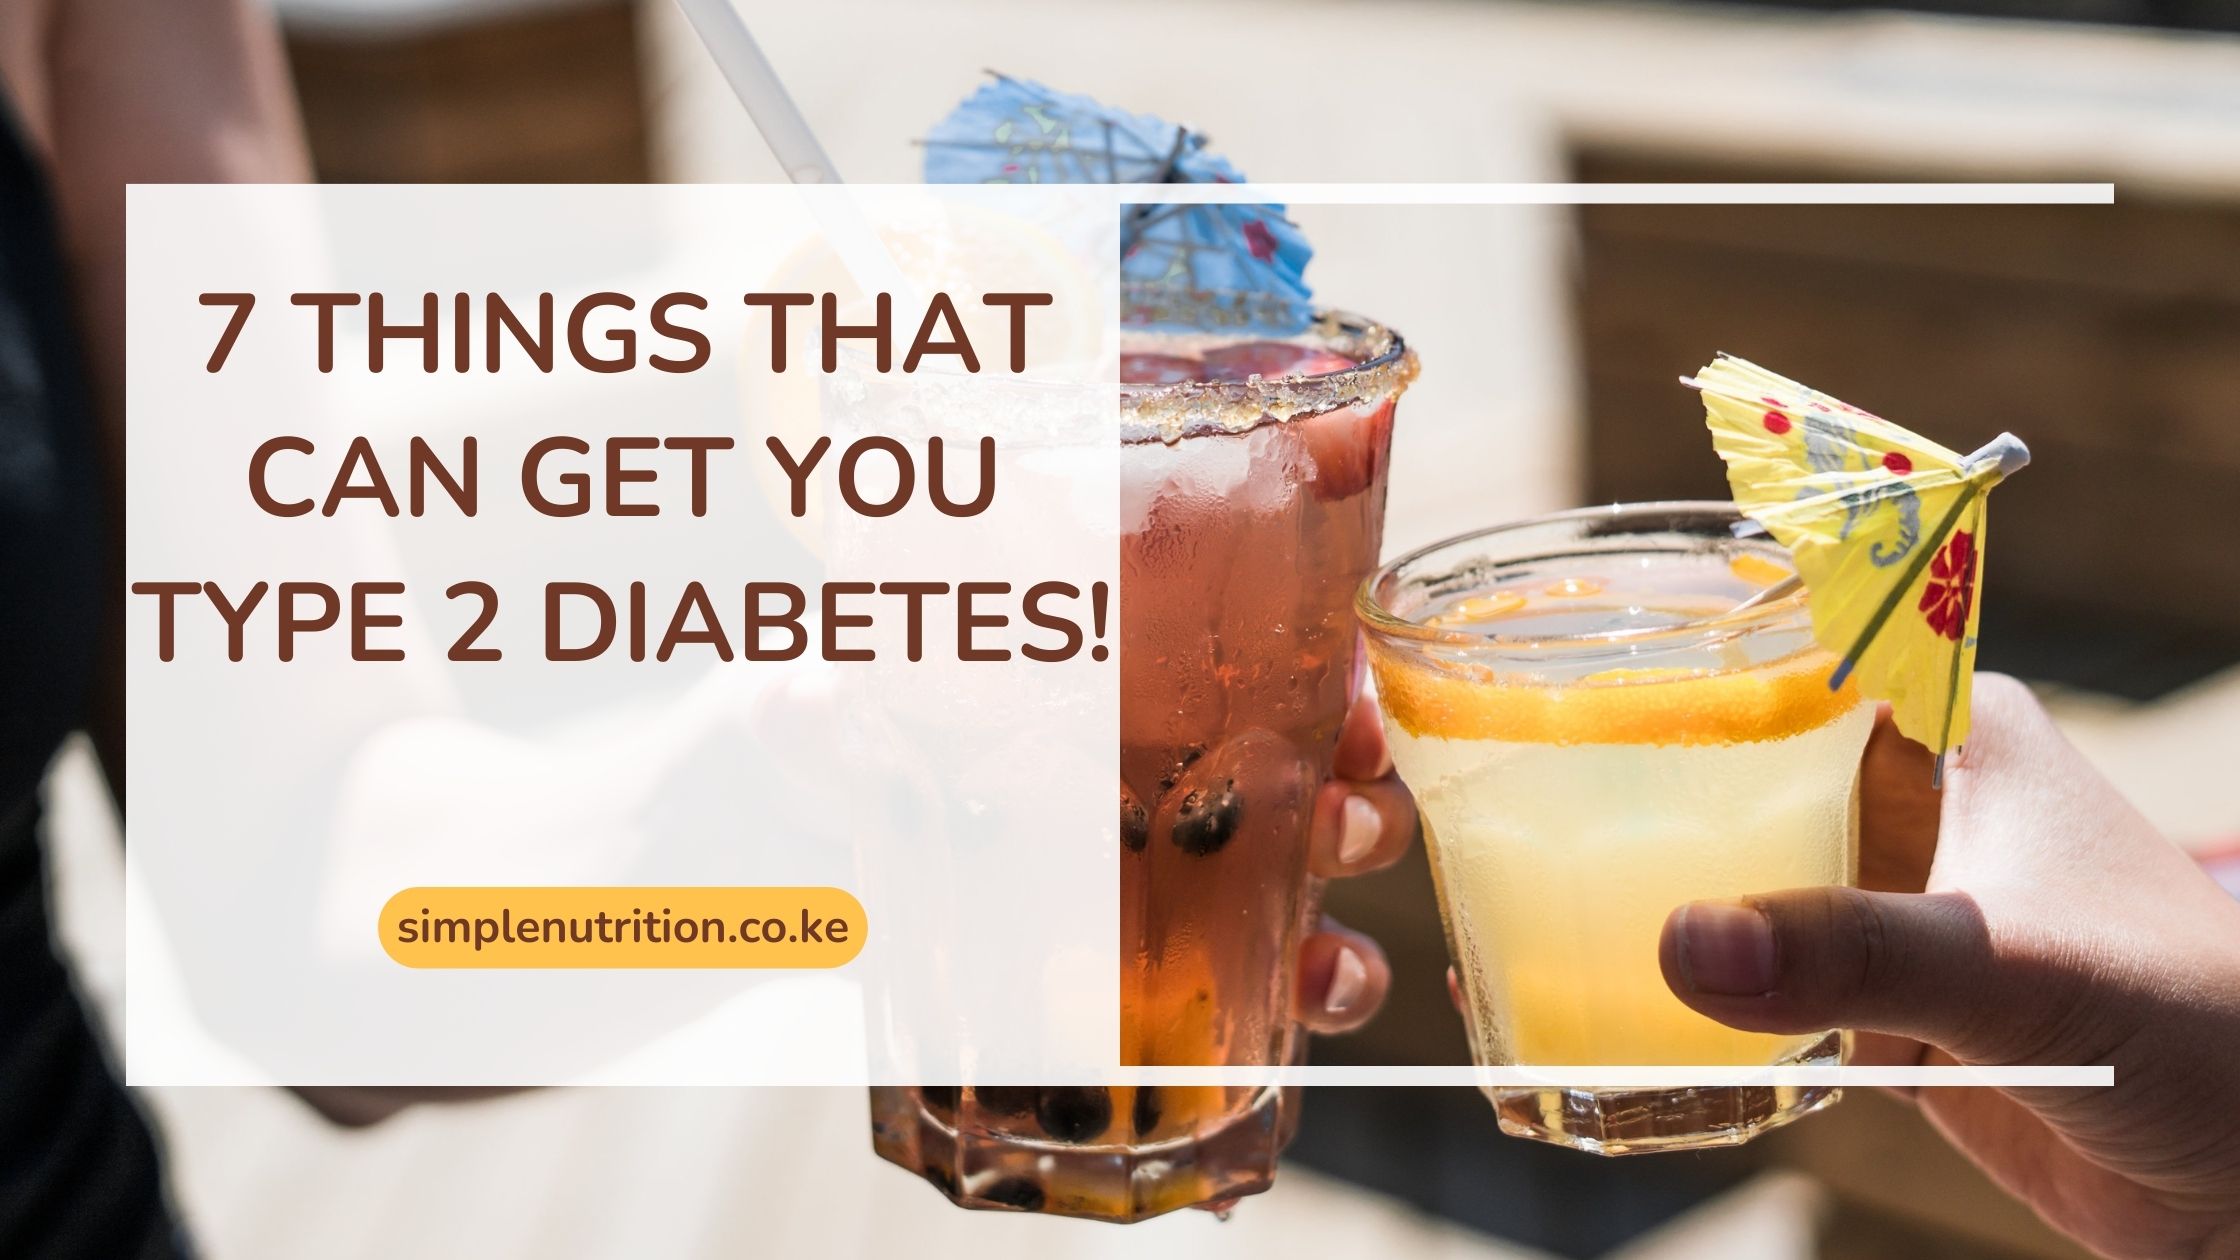 7 Things that can get you Type 2 Diabetes!